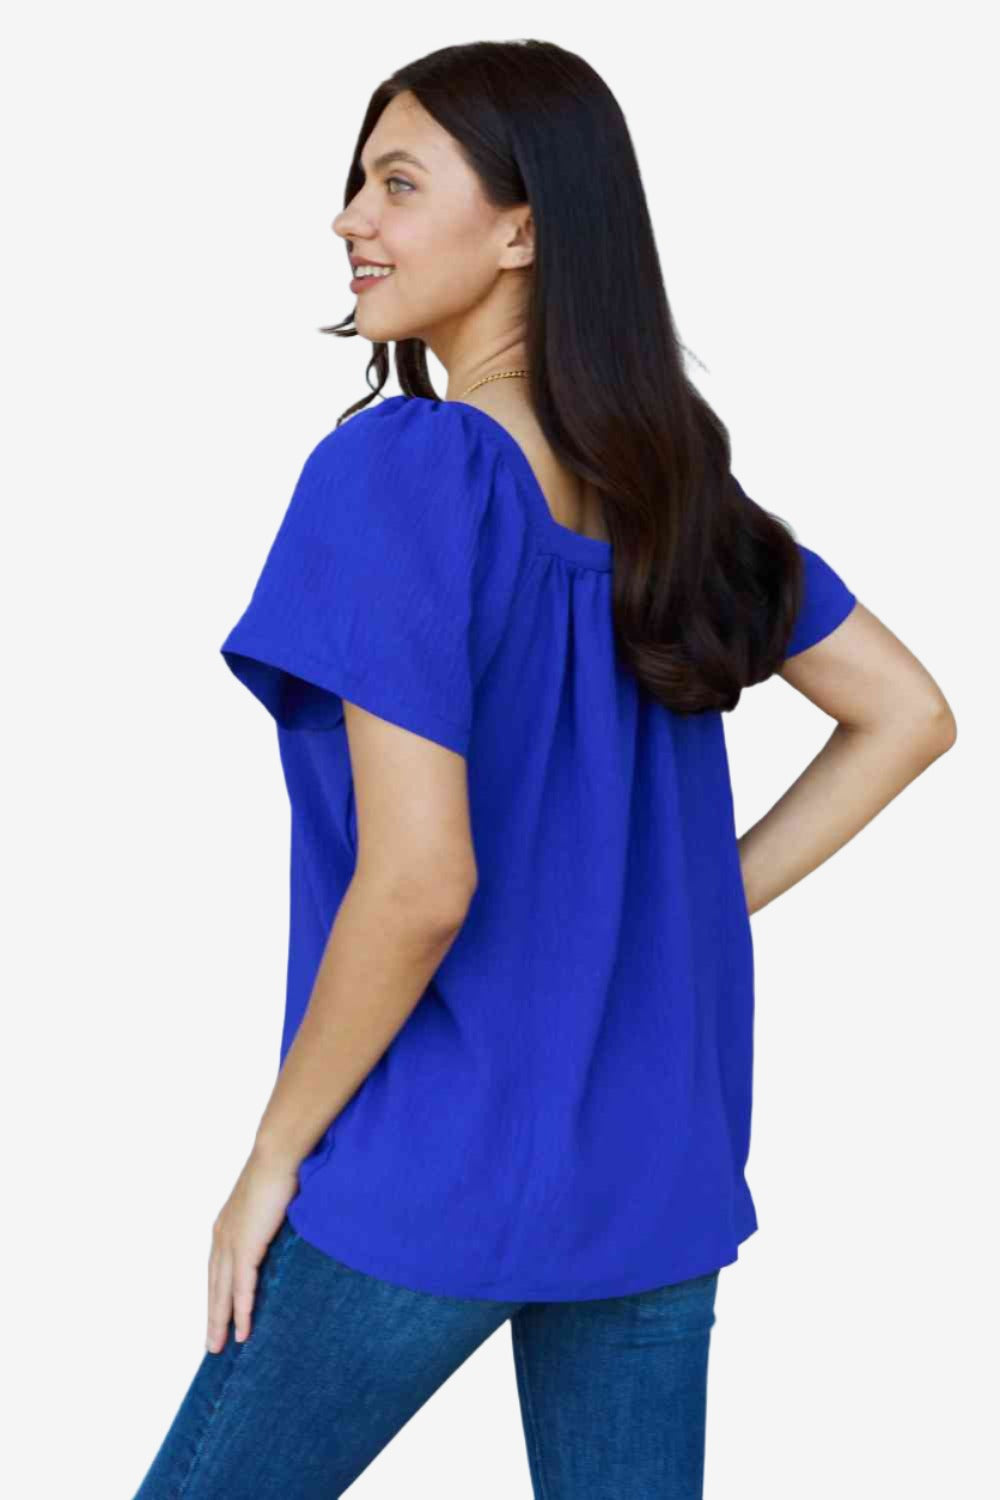 Keep Me Close Square Neck Short Sleeve Blouse in Royal